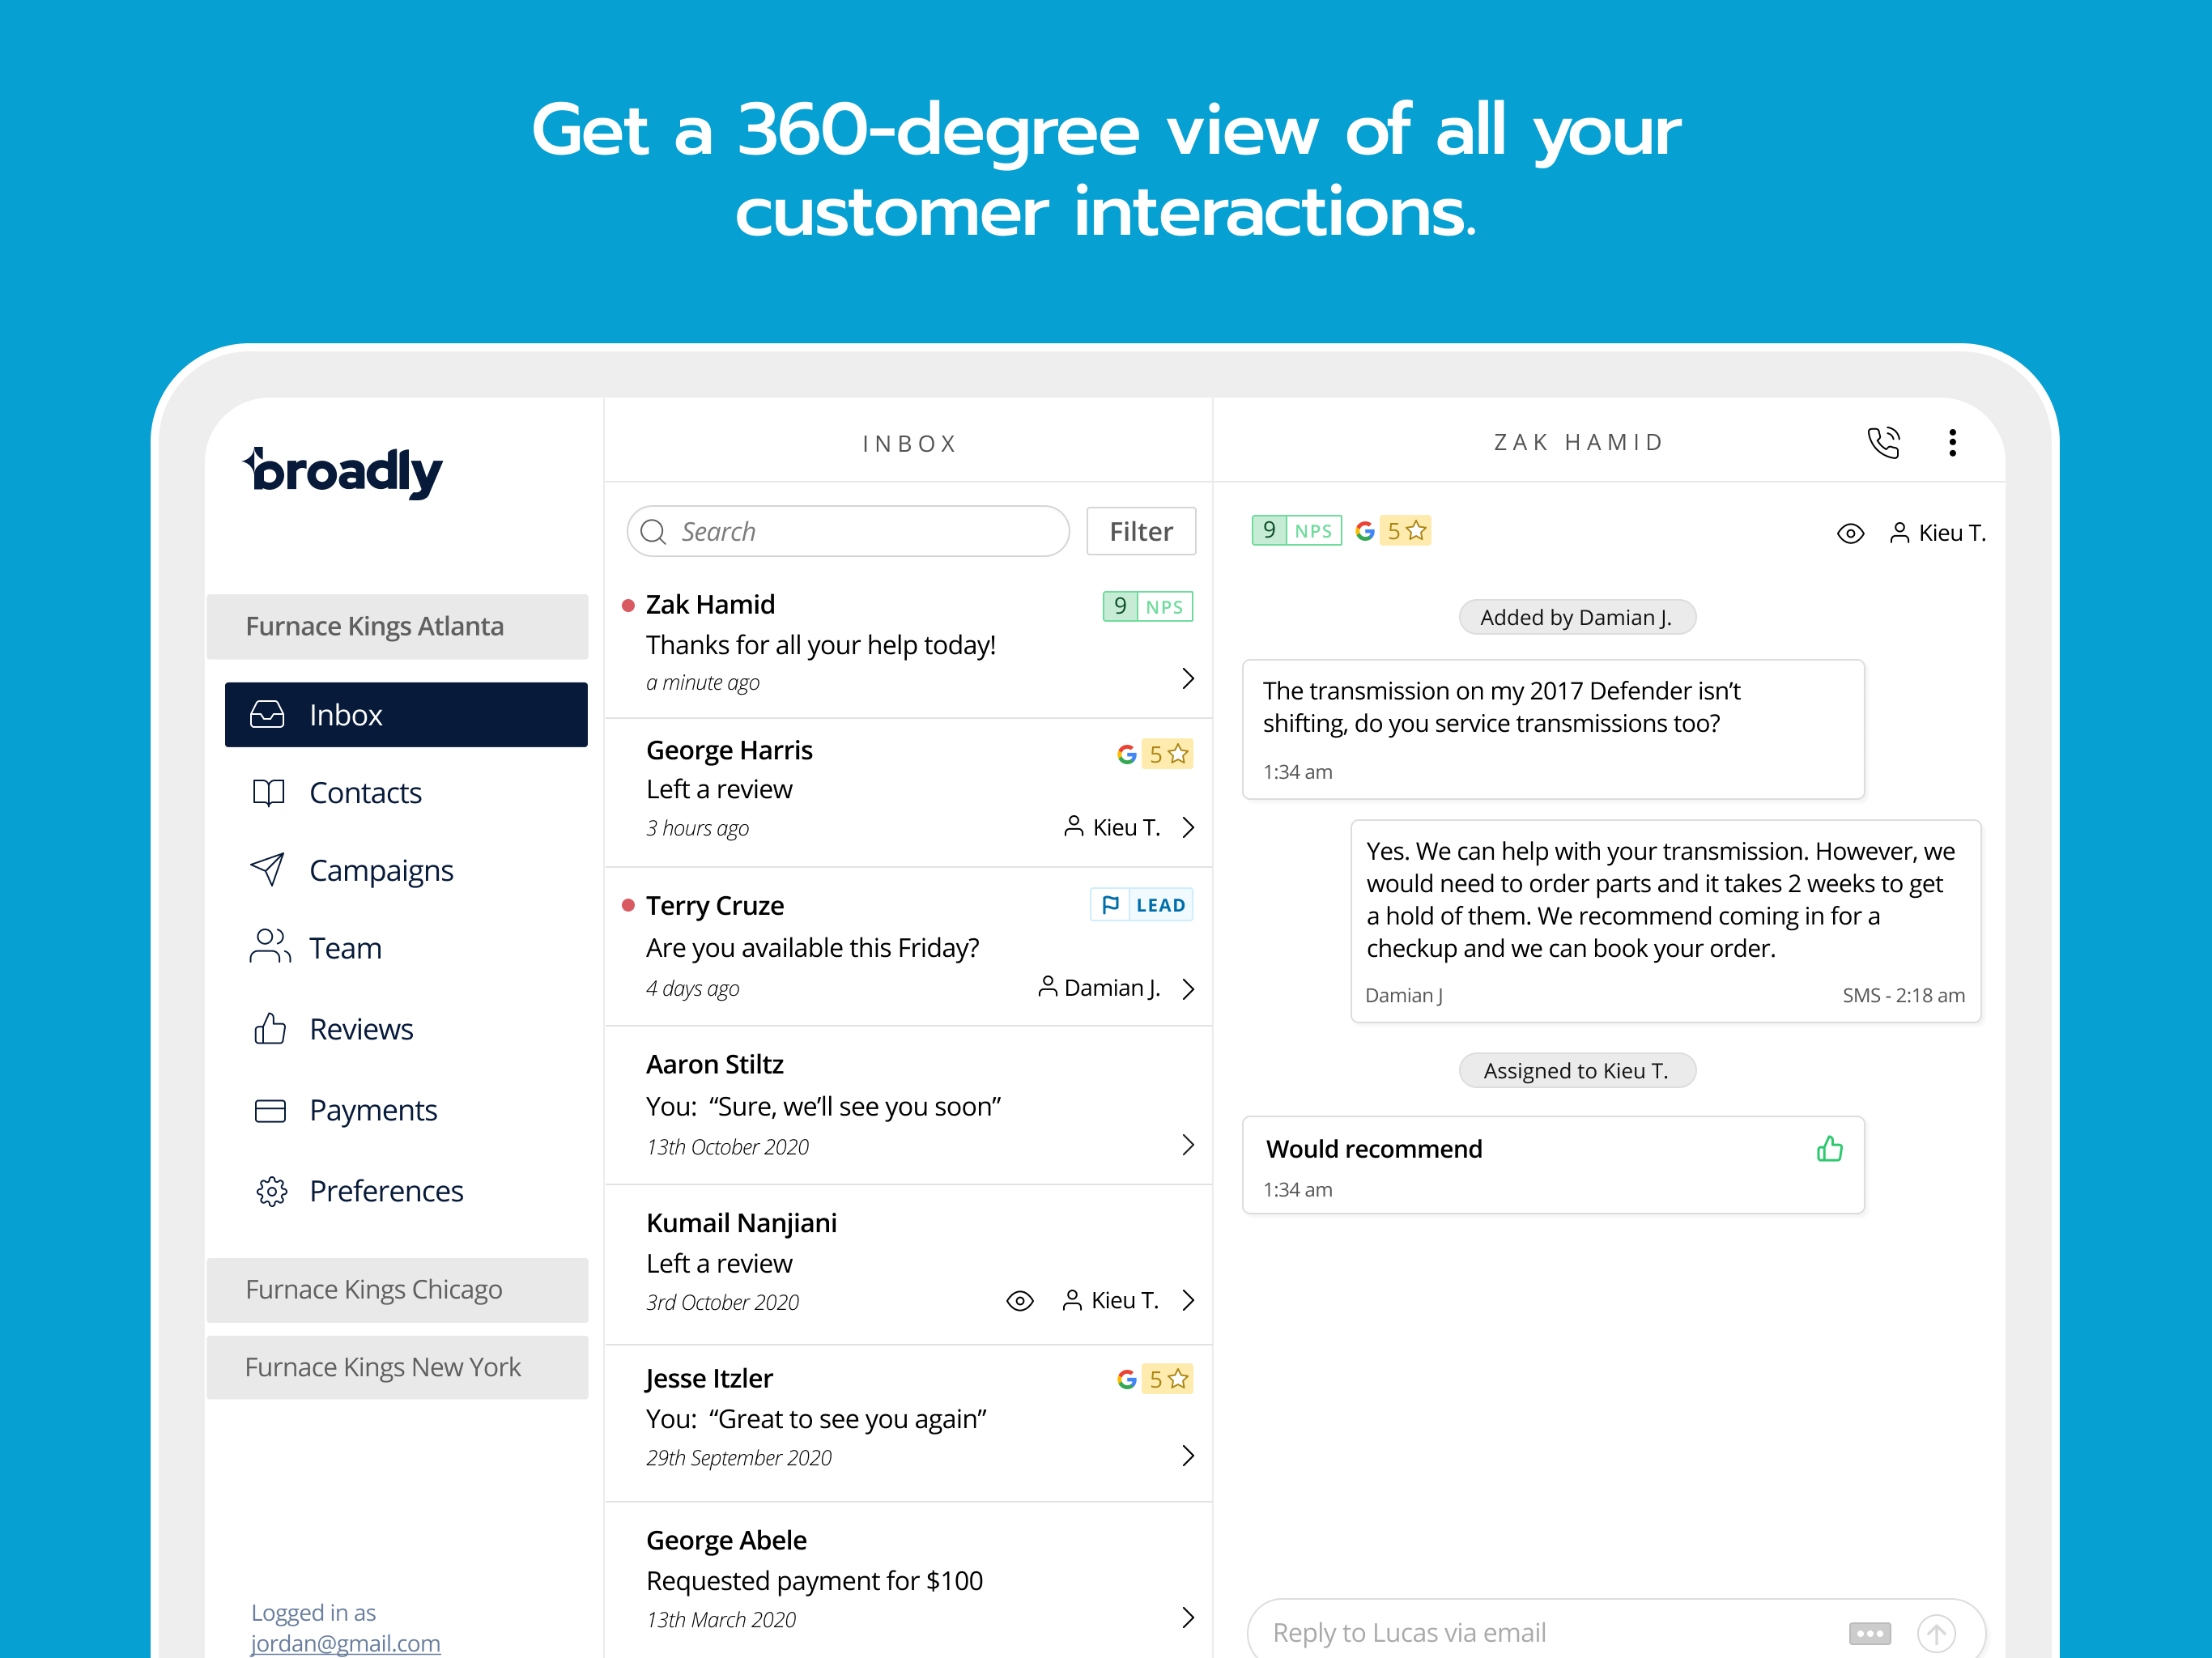 Broadly's shared team Inbox consolidates leads from Google, Facebook, Instagram, Web Chat, and website contact forms. Easily see conversation history with all leads and customers.